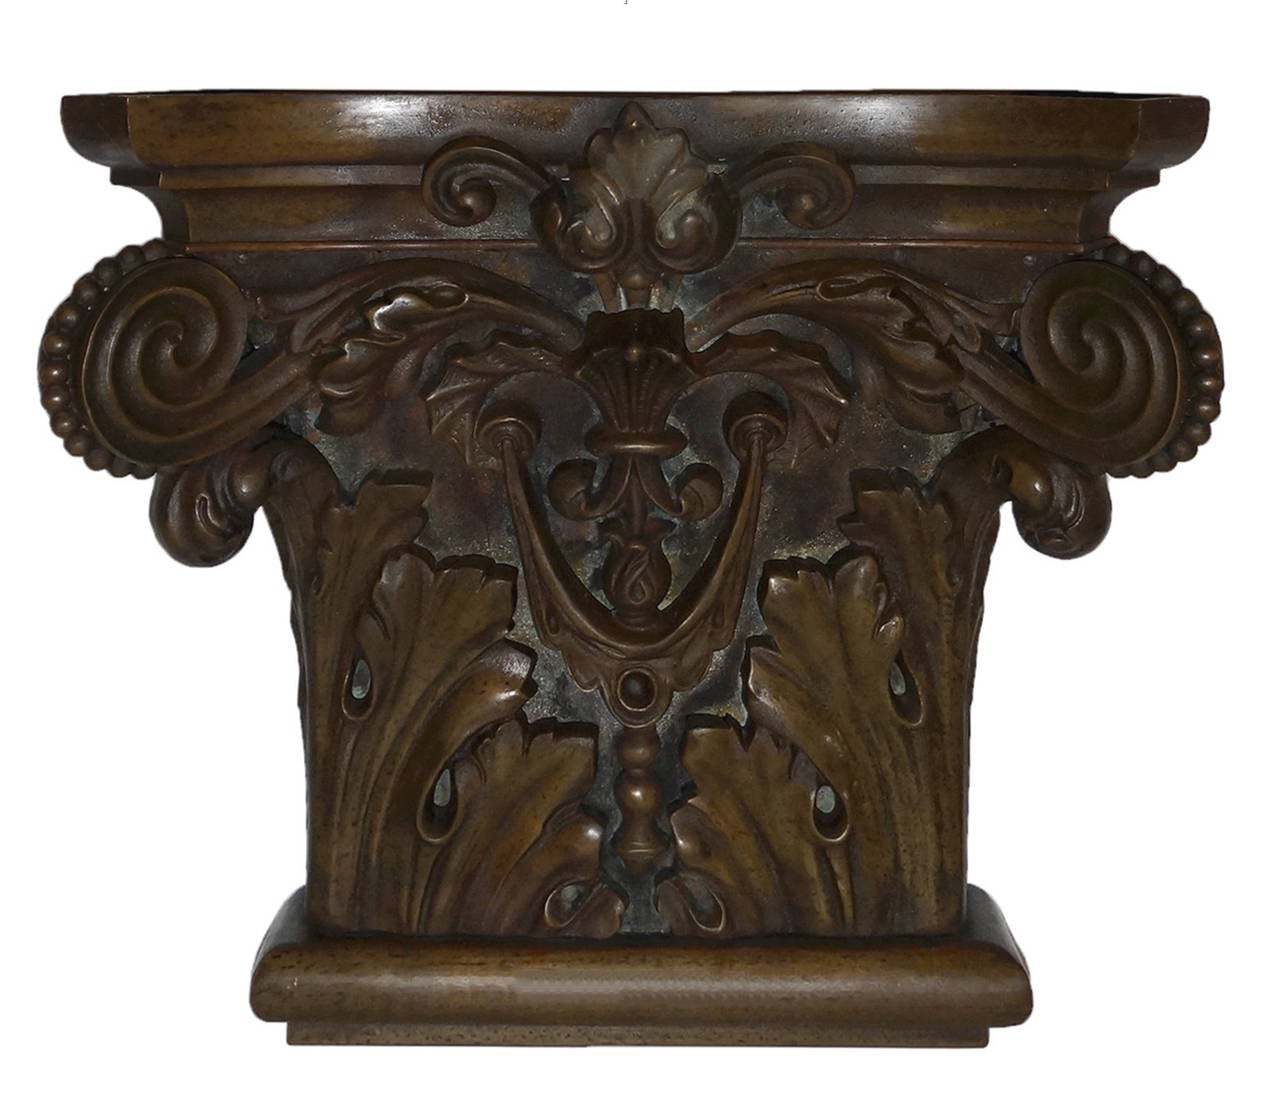 Exquisite lost wax bronze Corinthian style Pilaster capitals decorated with acanthus leaves and scrolls, from a 1920s, NYC bank interior.